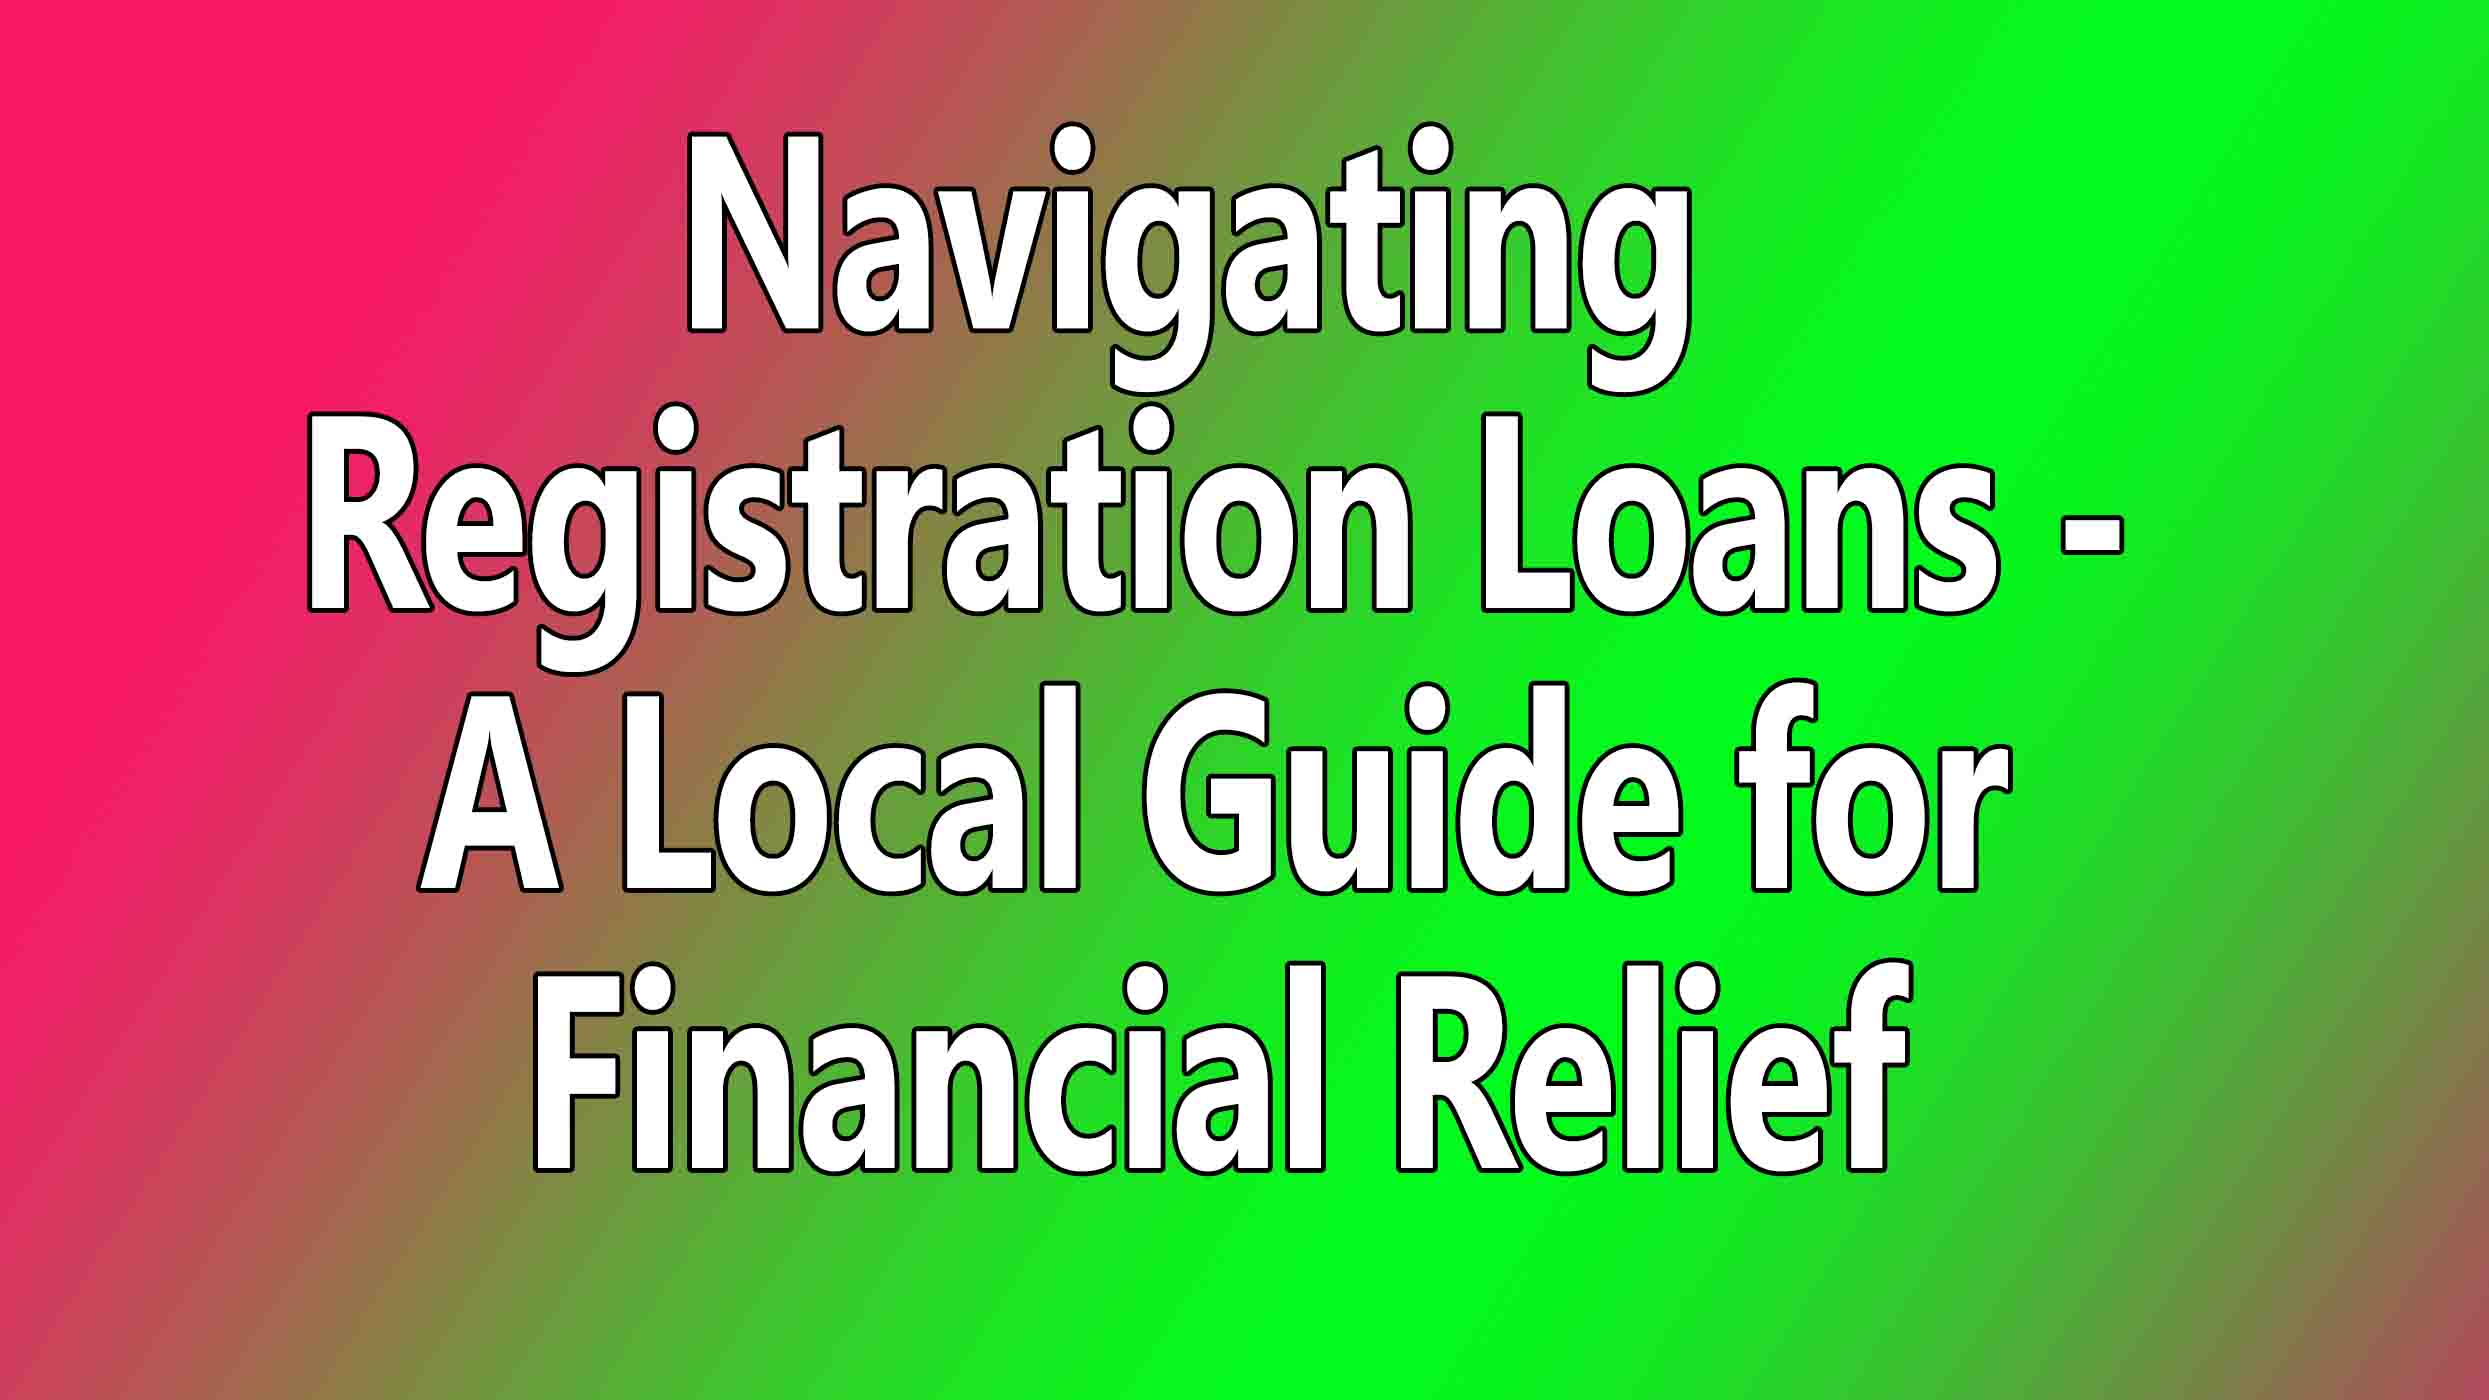 Navigating Registration Loans - A Local Guide for Financial Relief